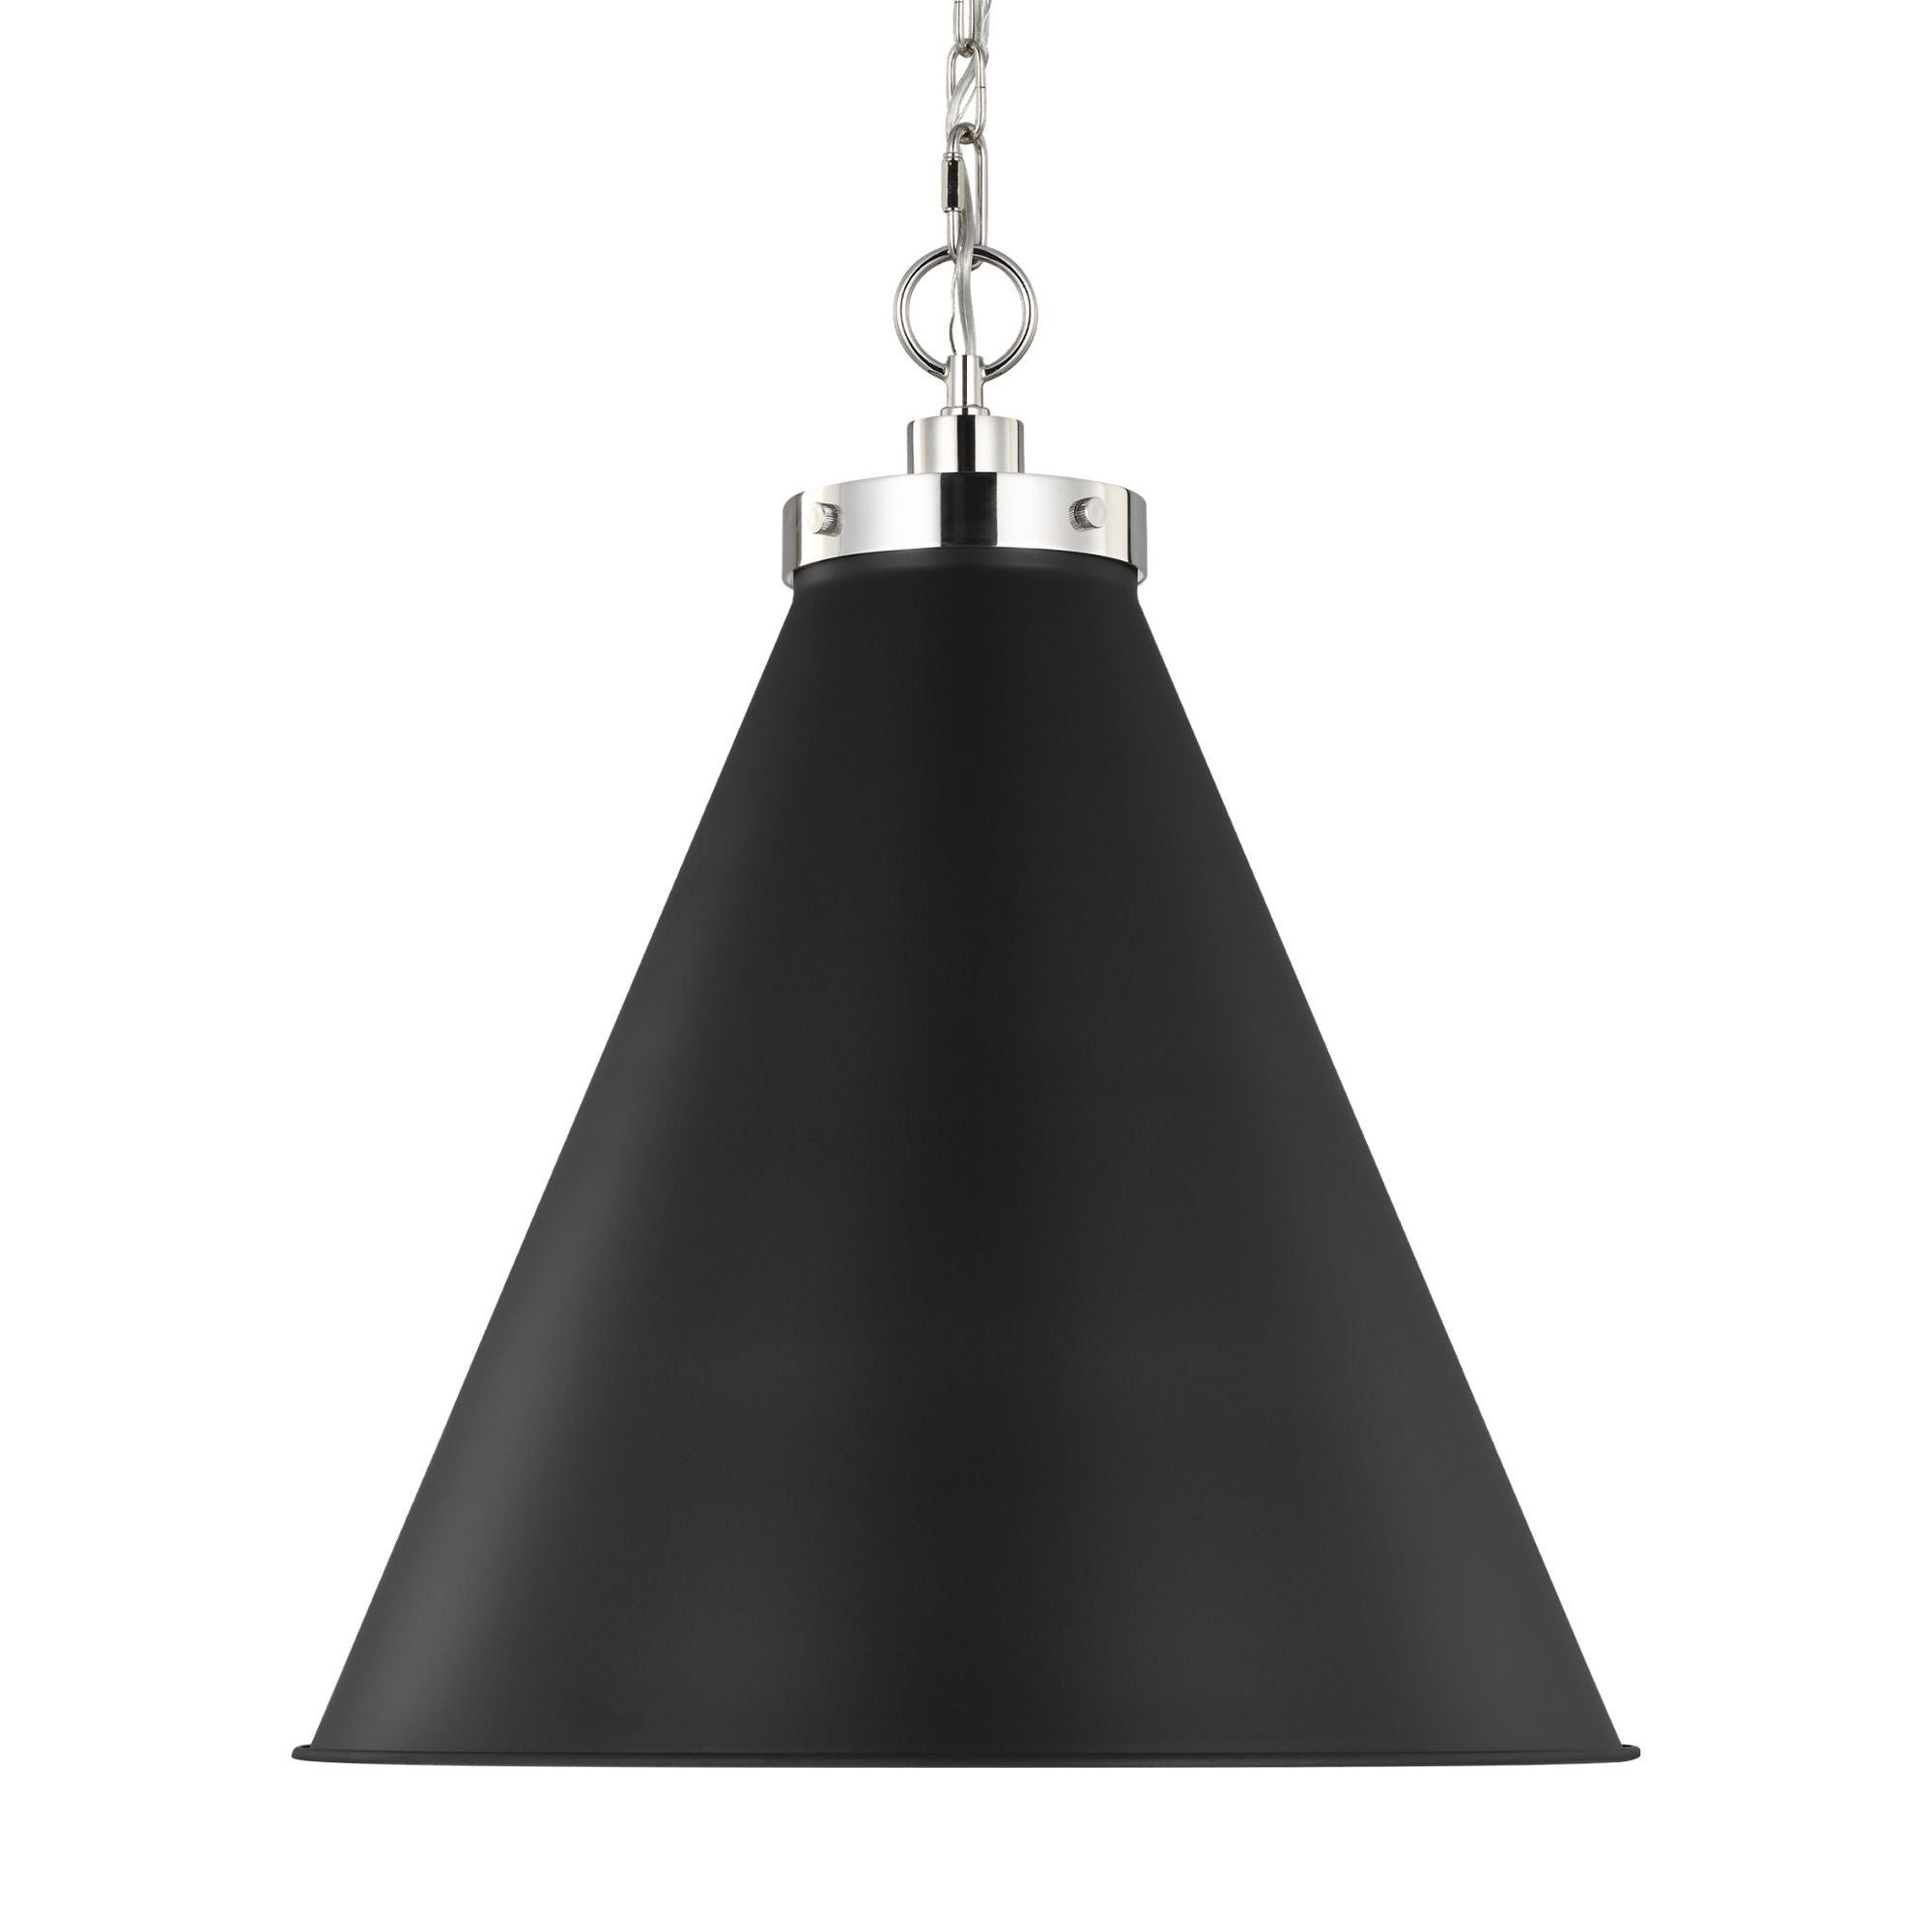 Chapman & Myers Wellfleet Large Cone Pendant in Midnight Black and Polished Nickel